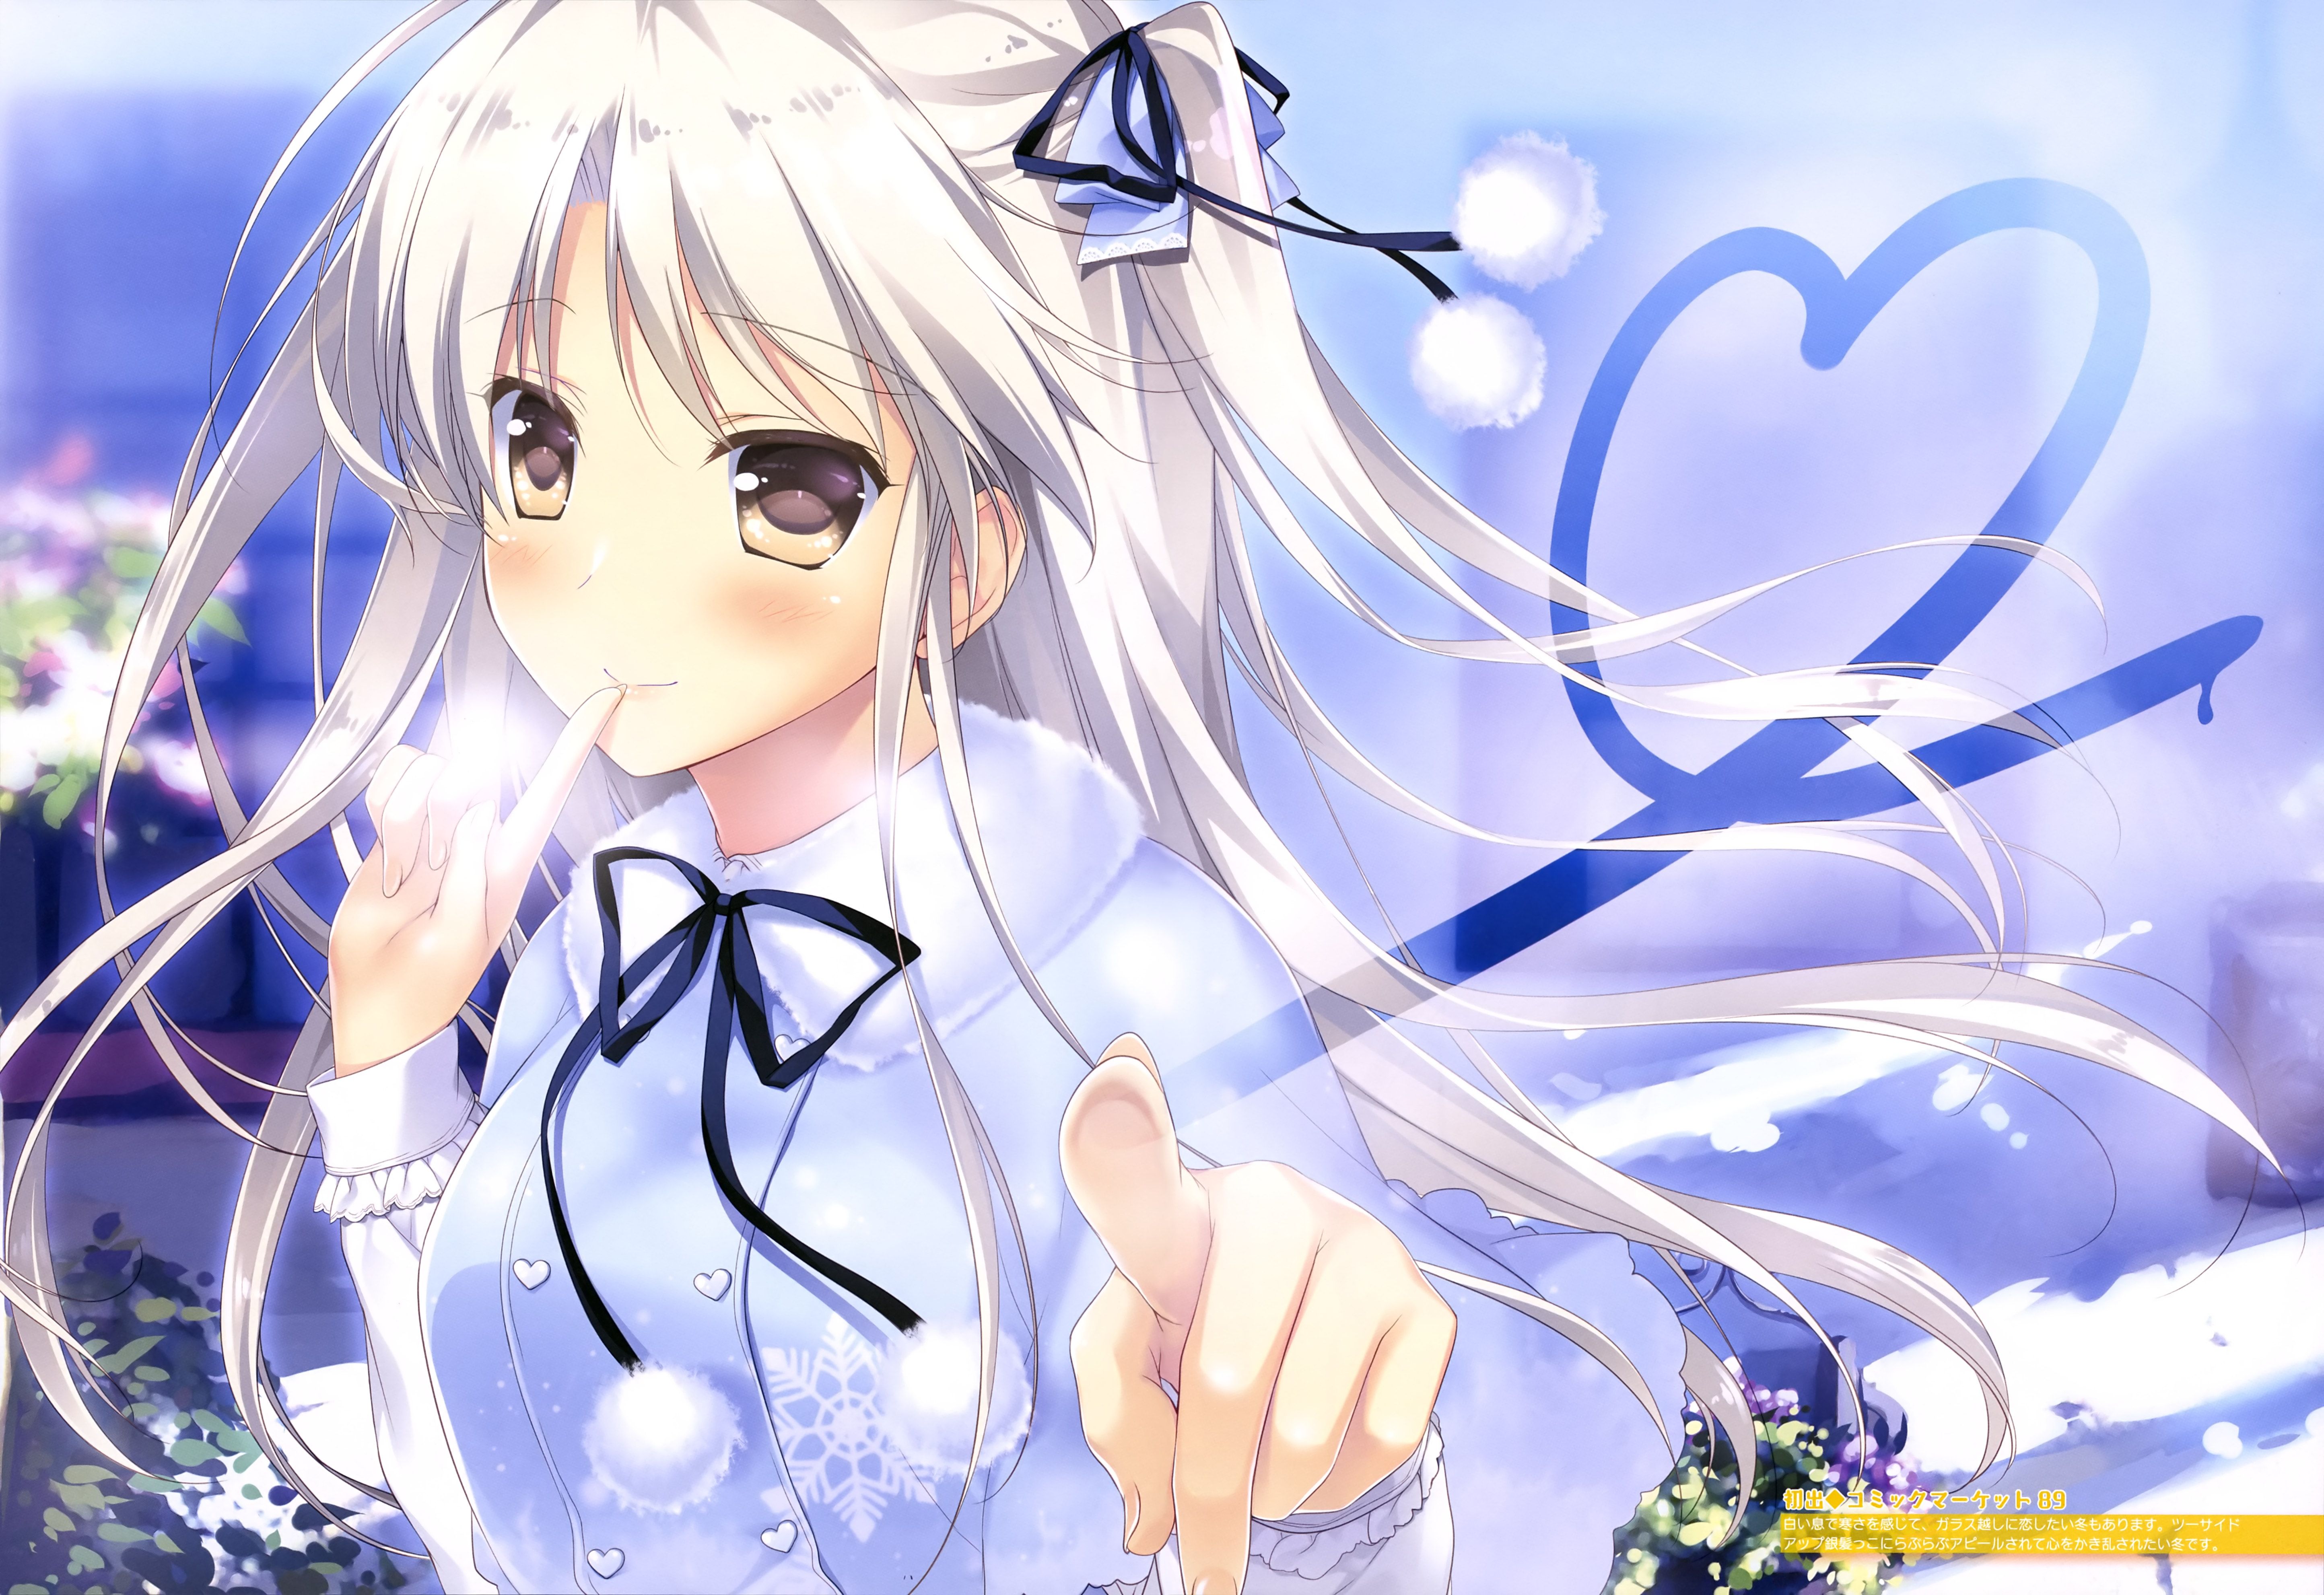 Download 5776x3965 Anime Girl, Shy Expression, White Hair